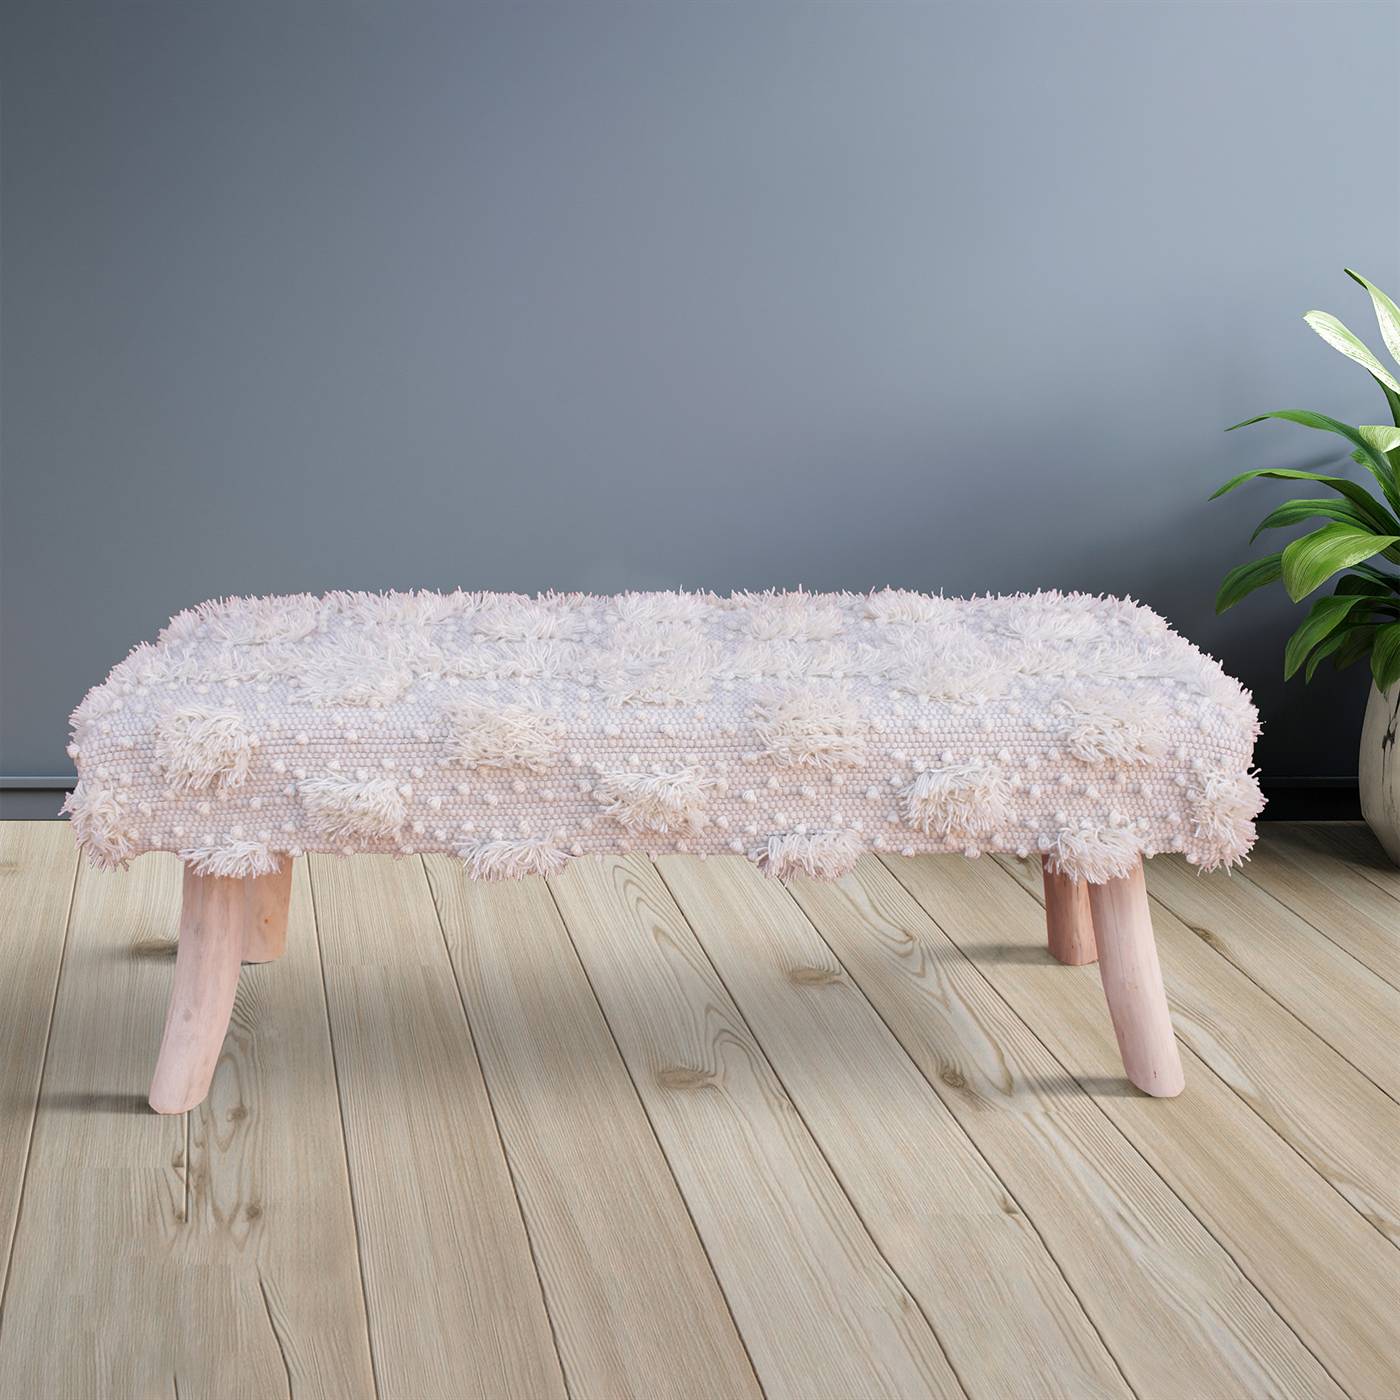 Parkin Bench, 120x40x50 cm, Natural White, Wool, Hand Woven, Pitloom, Cut And Loop